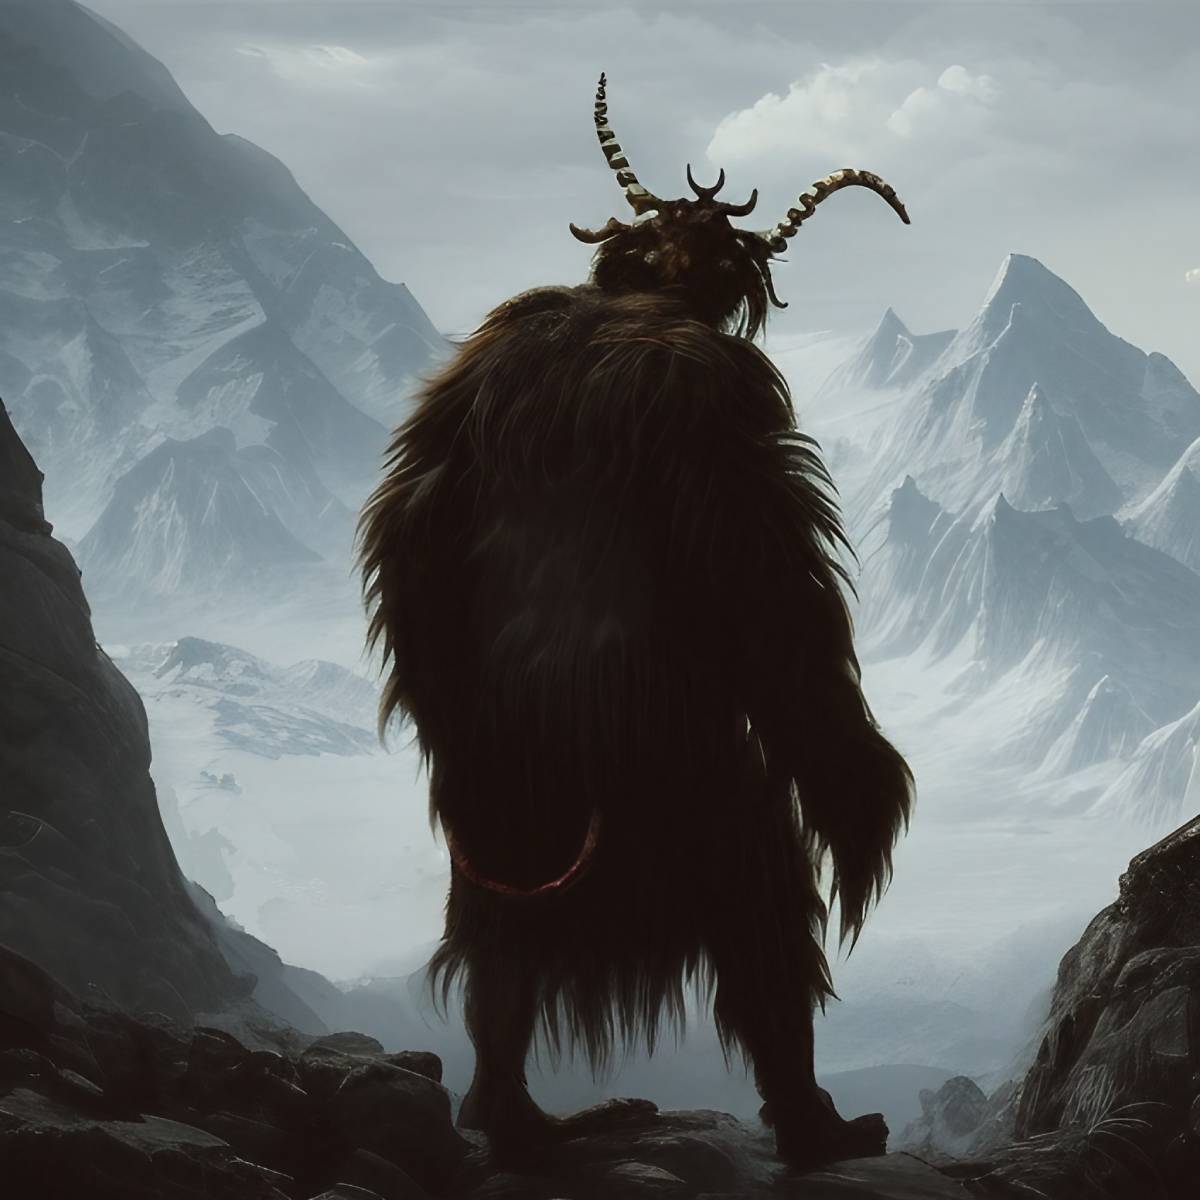 A painting of Krampus with the Alpine mountains in the background. For hundreds of years, just before they are visited by Santa, children in the Alpine regions of Germany, Austria, the Czech Republic and Slovenia have to ride out the coming of his dark companion—a long-tongued goat-like demon from Hell known as Krampus. (© Odd Feed)